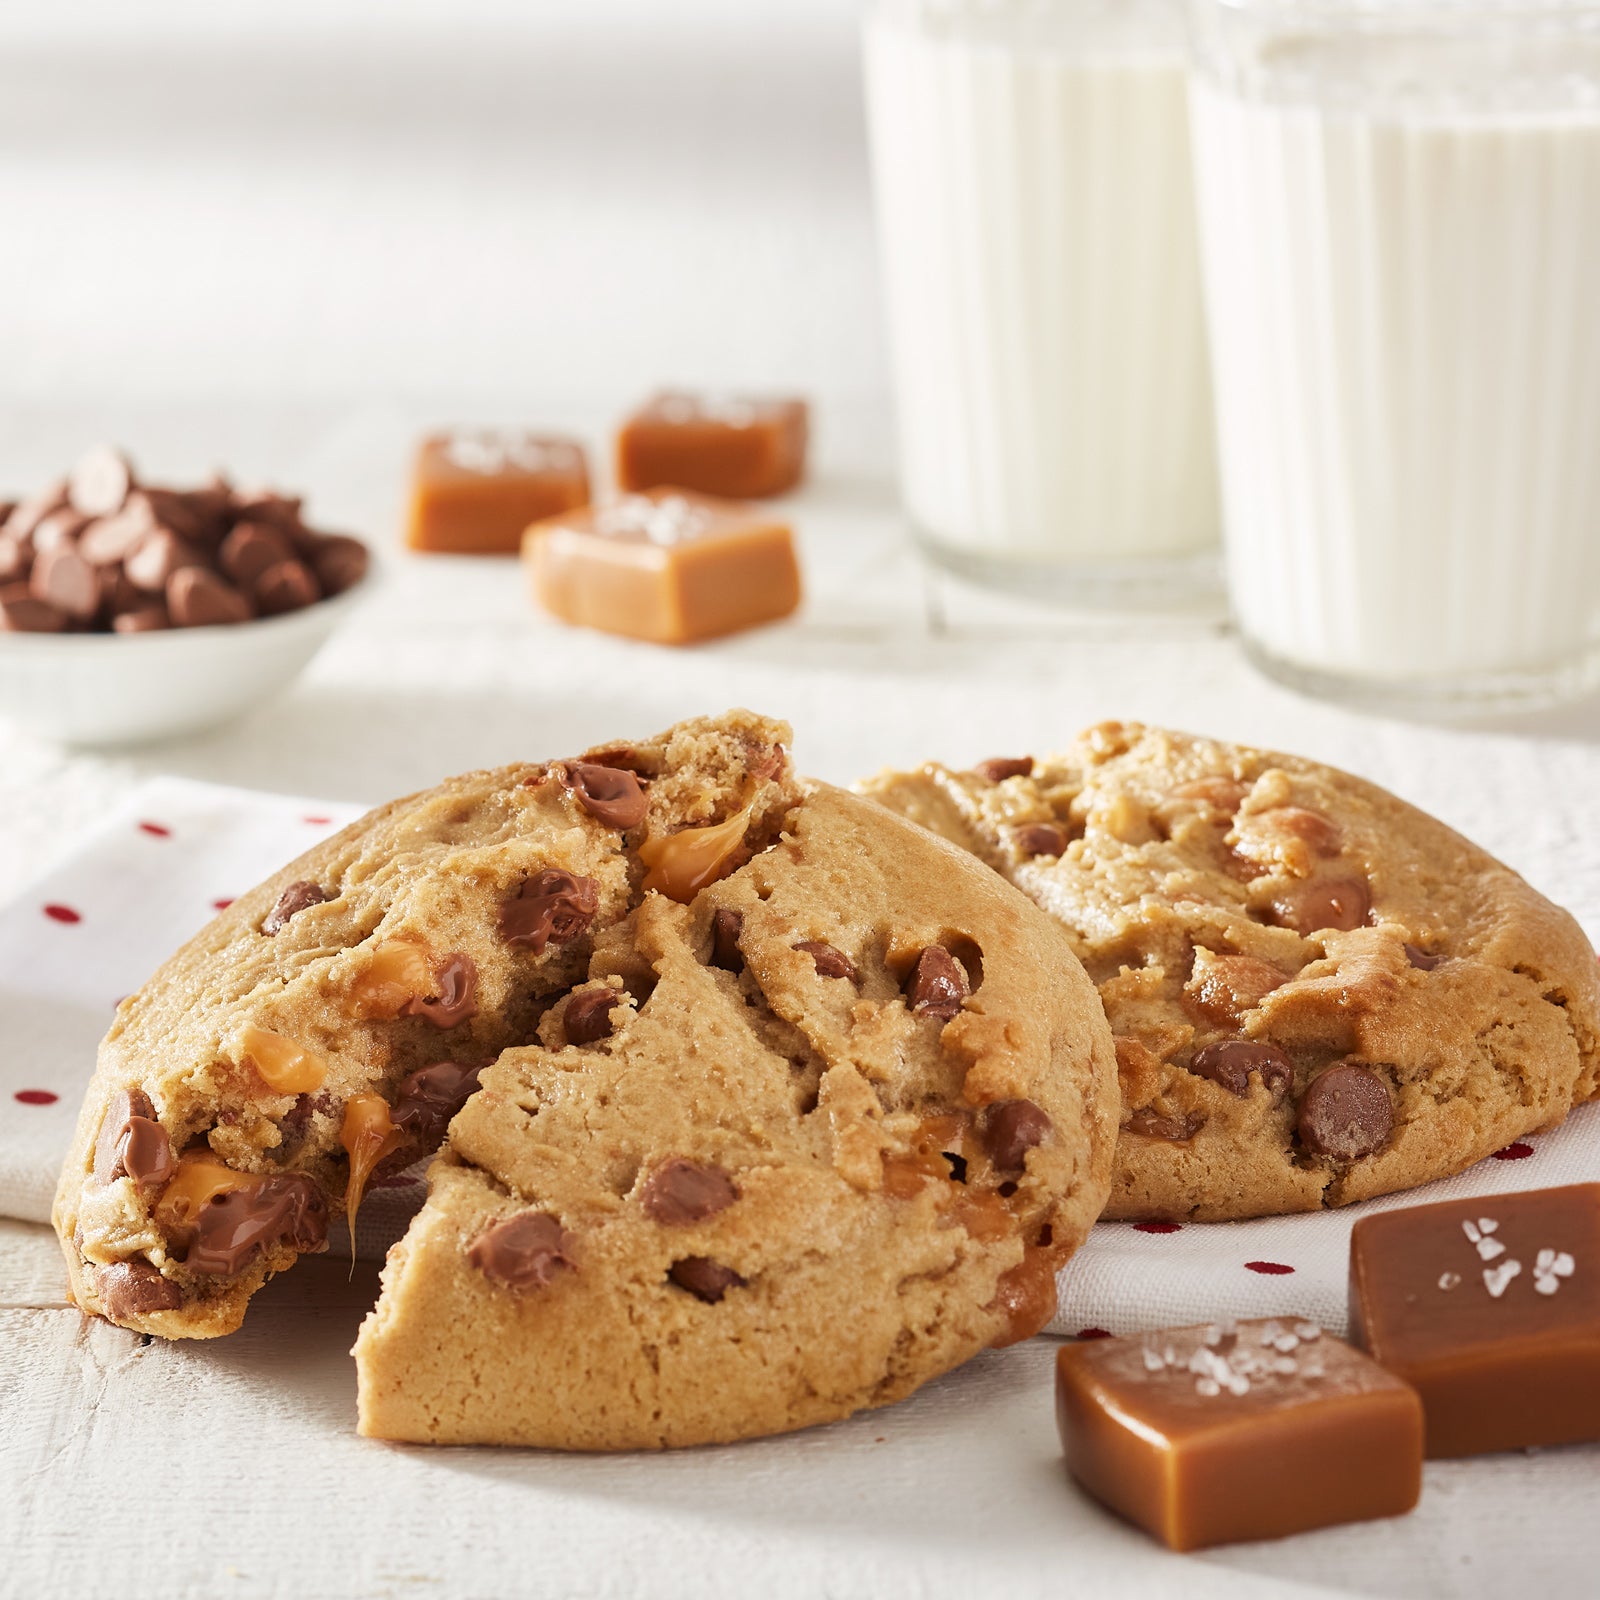 Salted caramel mega cookie broken in half with pieces of caramel surrounding the cookie